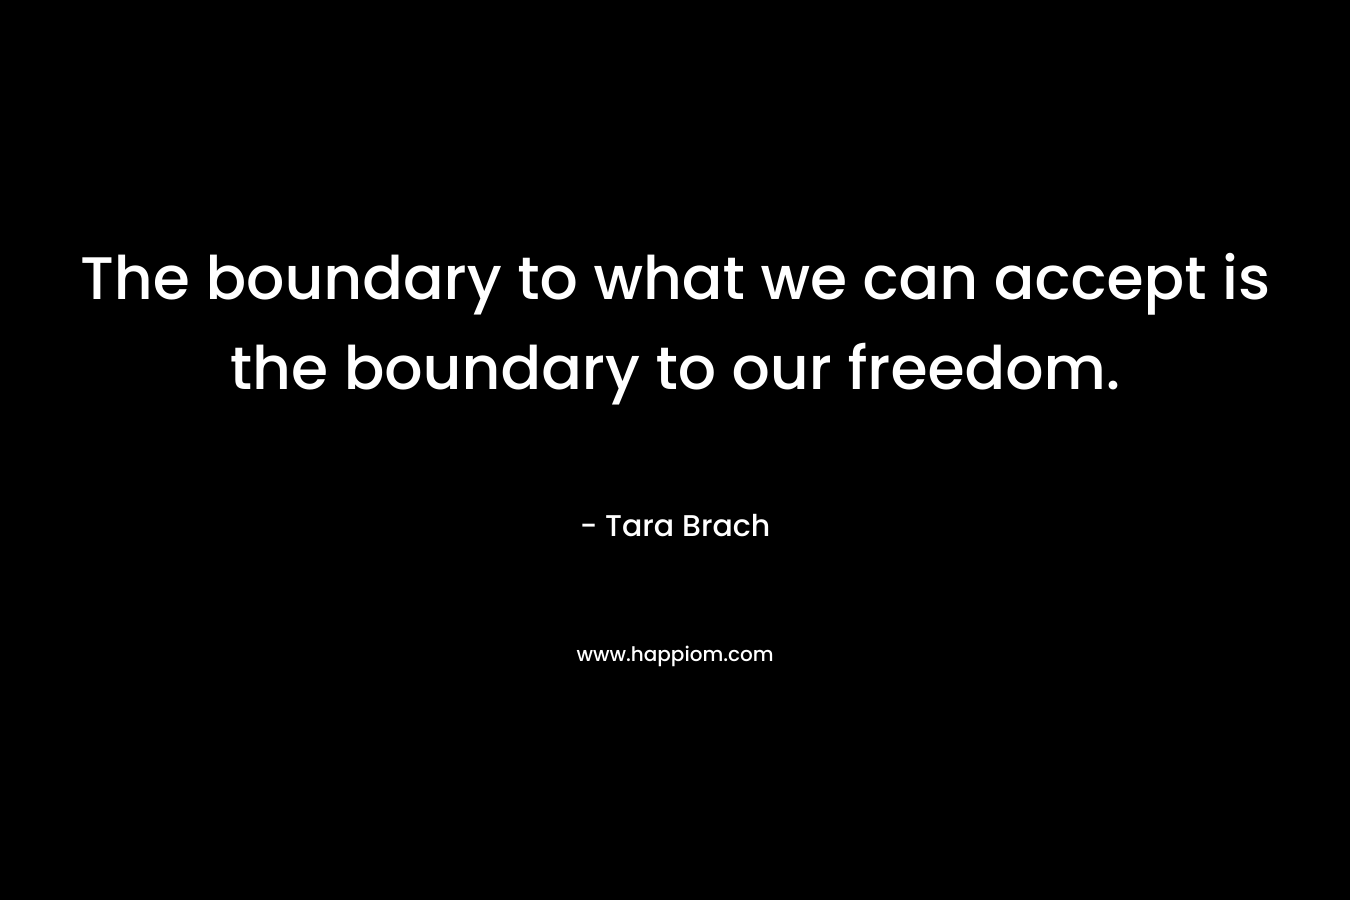 The boundary to what we can accept is the boundary to our freedom.